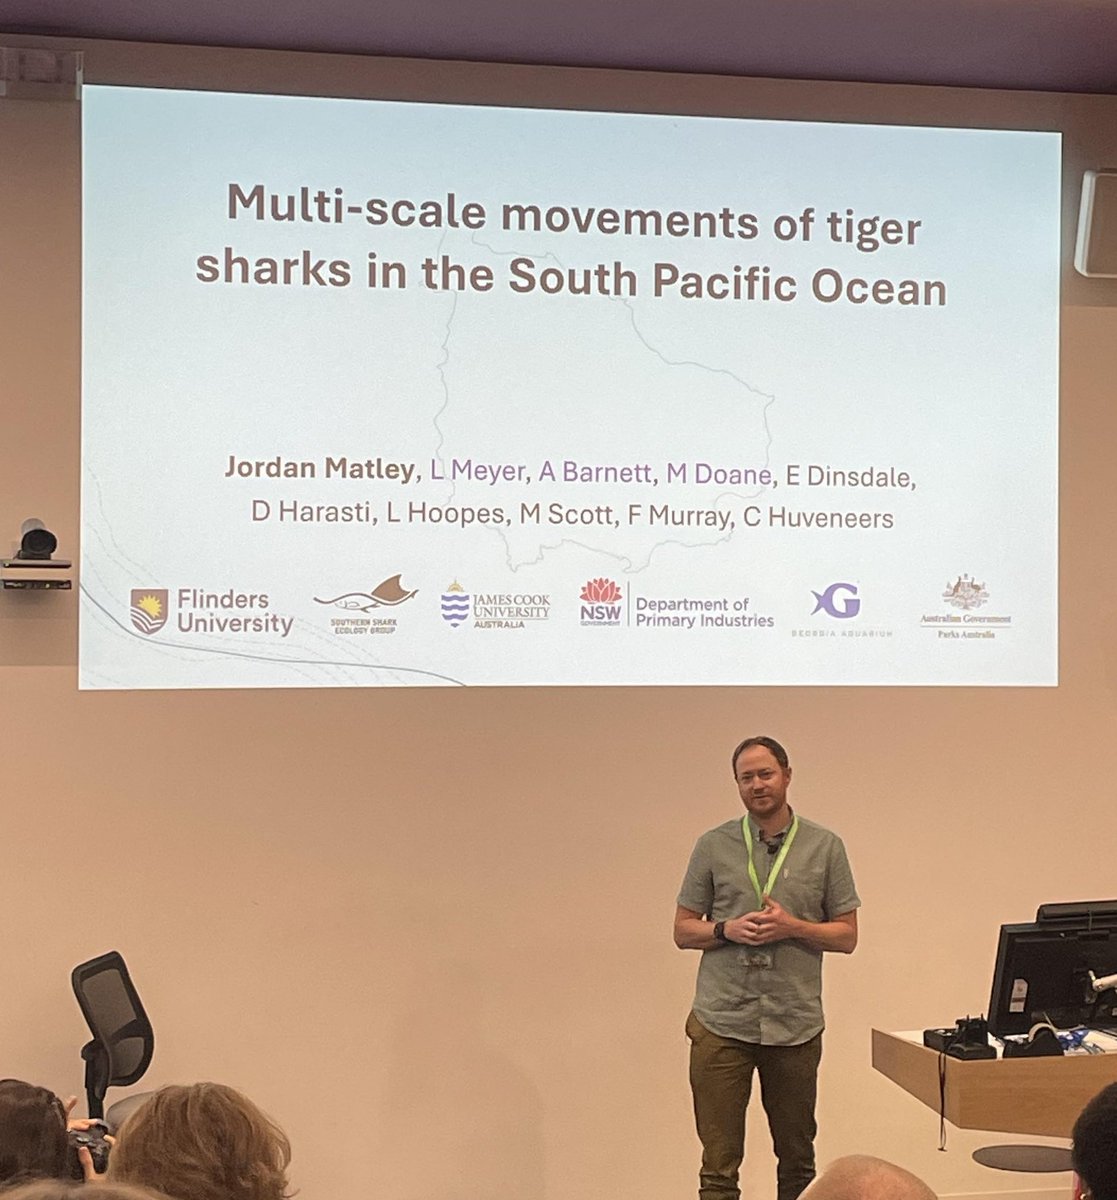 @OceaniaSharks talk on tiger sharks done and dusted. Great job by all @SouthernSharkEG lab! Wine plz 🍷